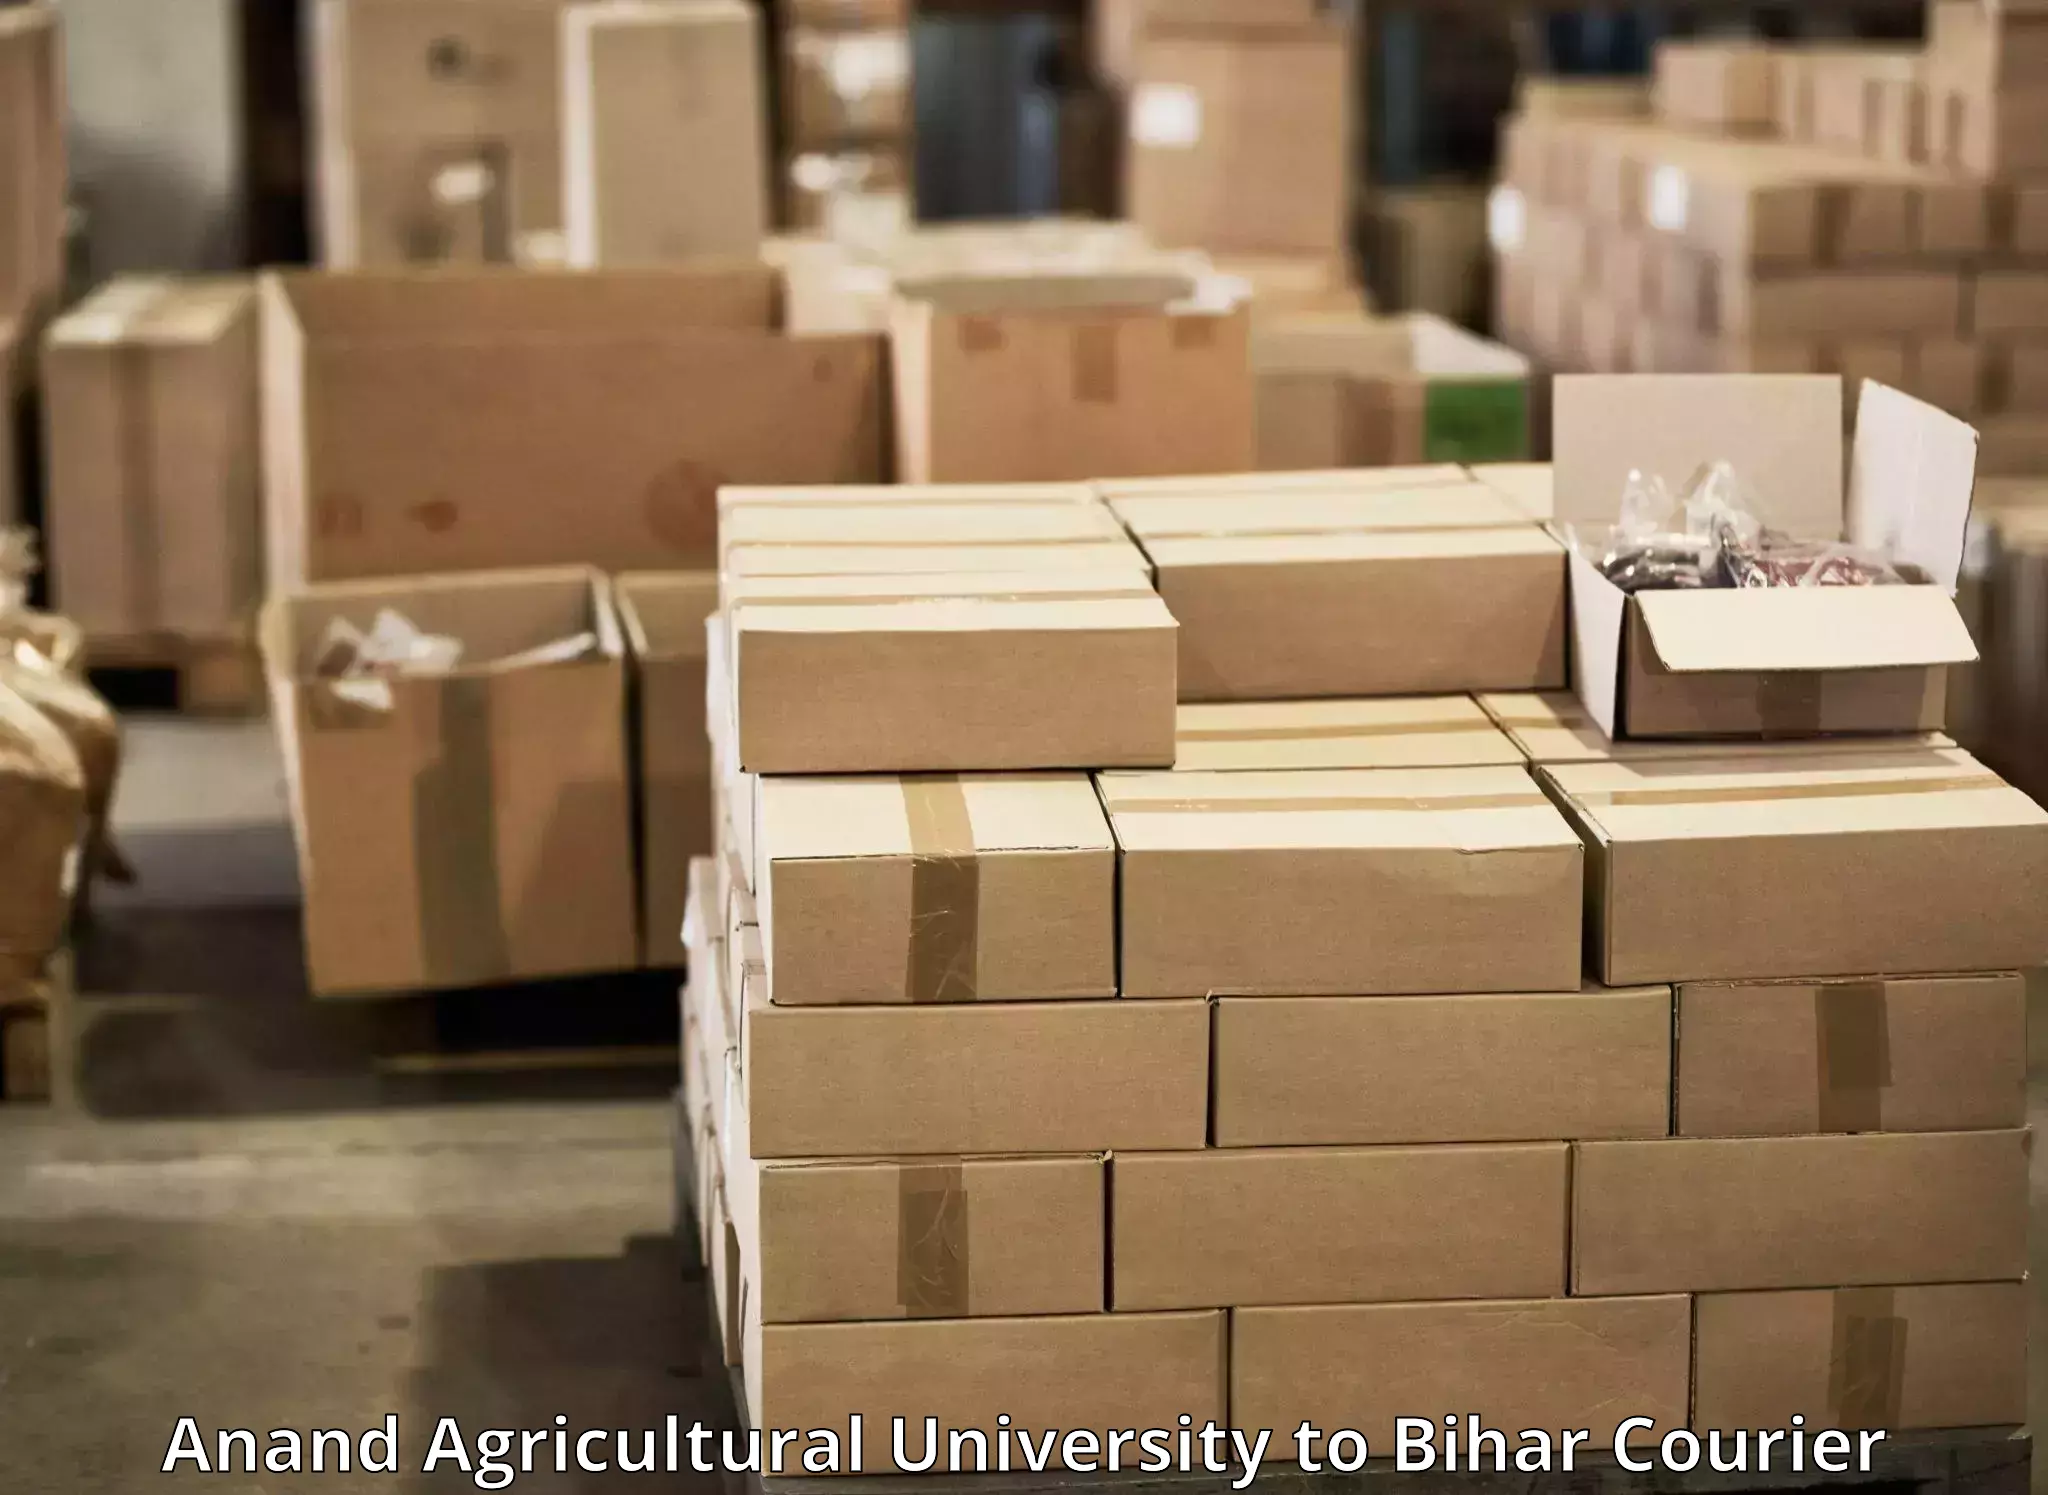 Express delivery capabilities Anand Agricultural University to Manjhaul